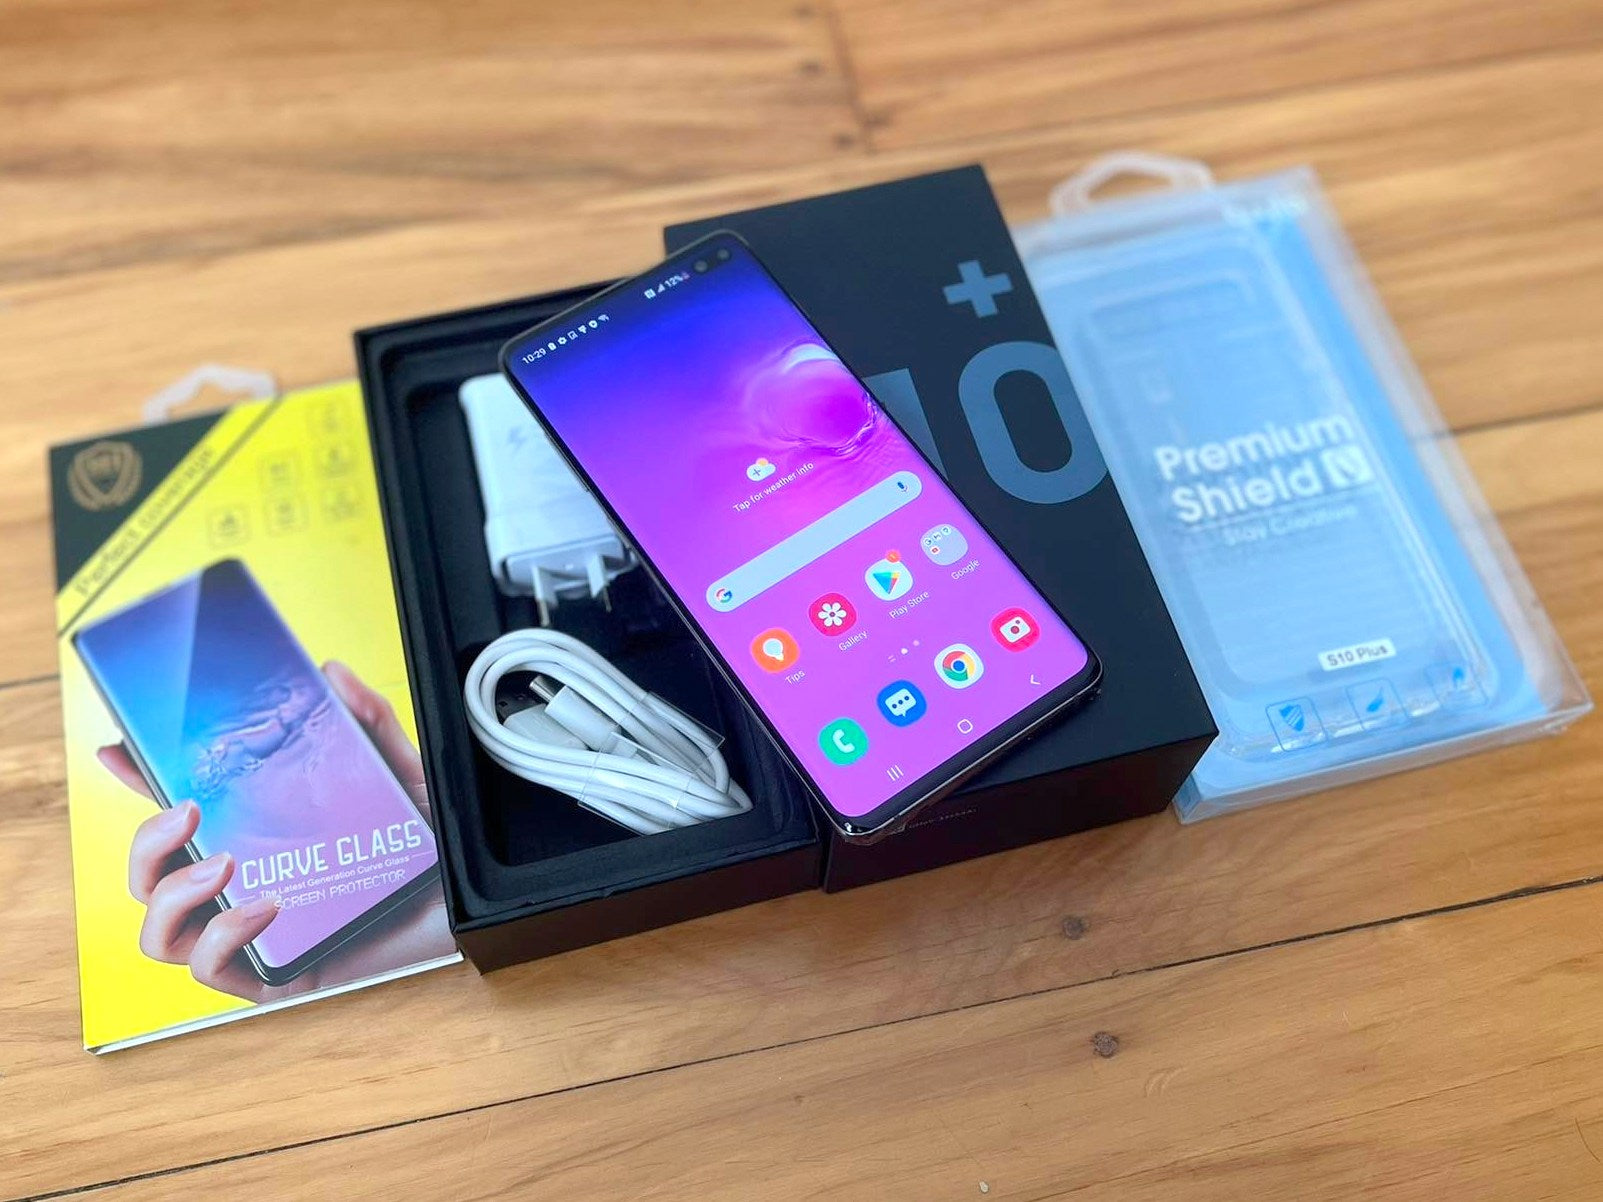 Samsung Galaxy S10 Plus Black 128GB (Like New) With New Case, Glass Screen Protector & Shipping